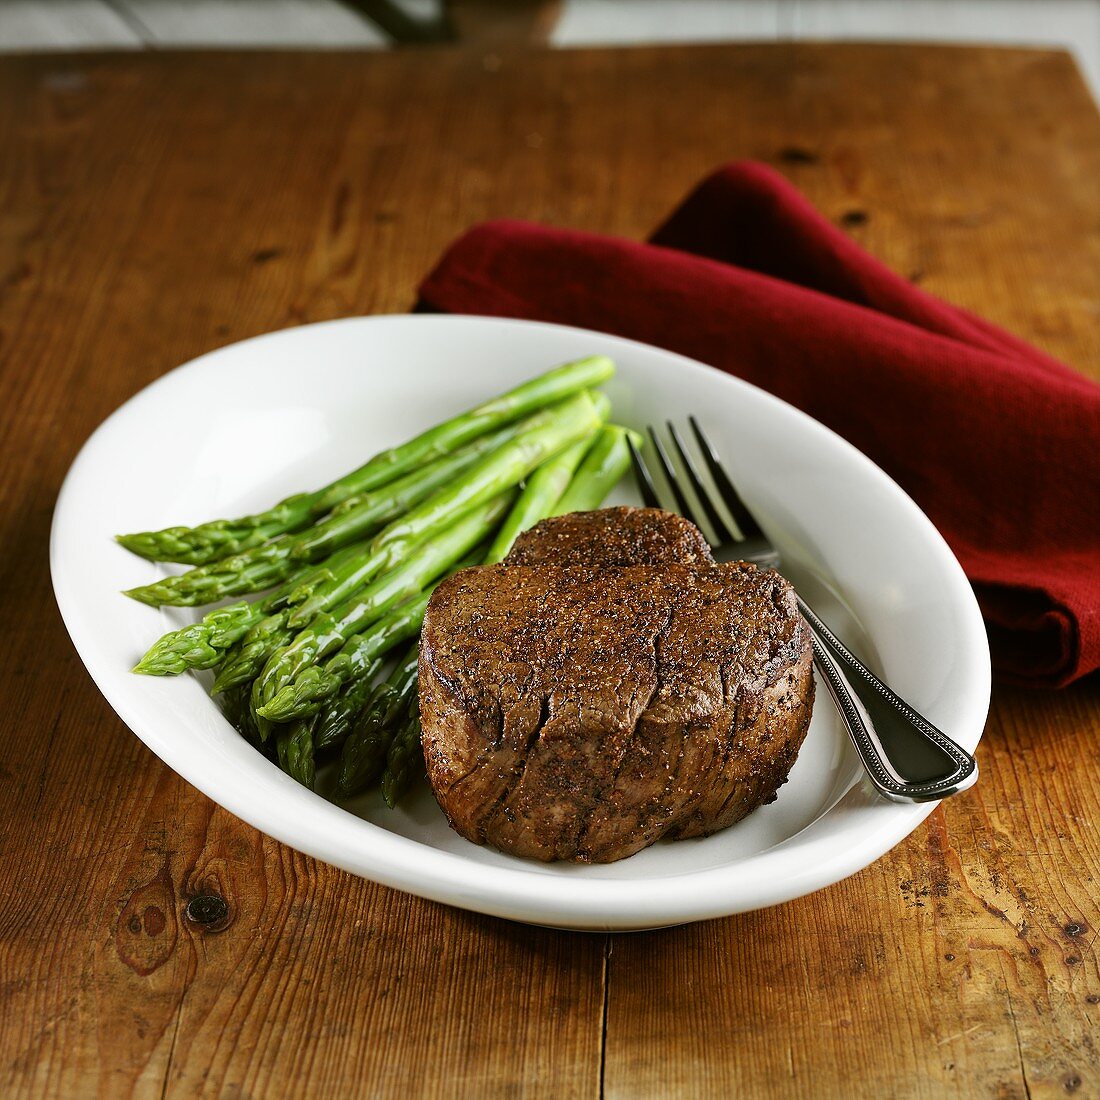 Beef fillet with green asparagus on wooden table